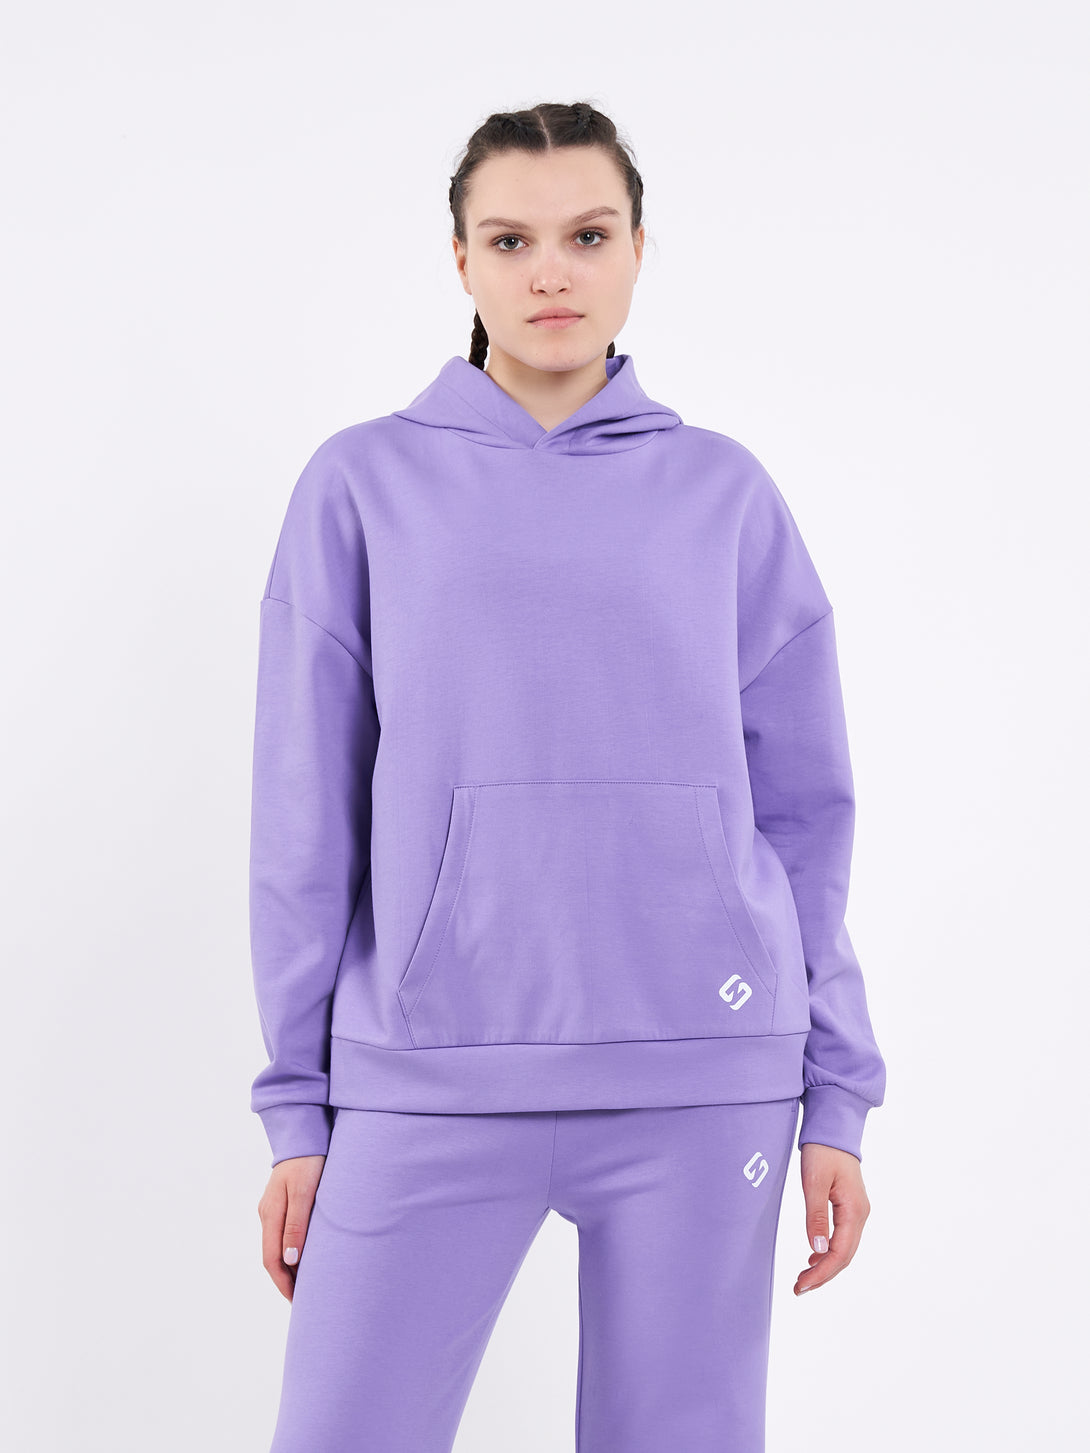 A Woman Wearing Paisley Purple Color Durable Oversized Comfort Hoodie for All-Day Wear